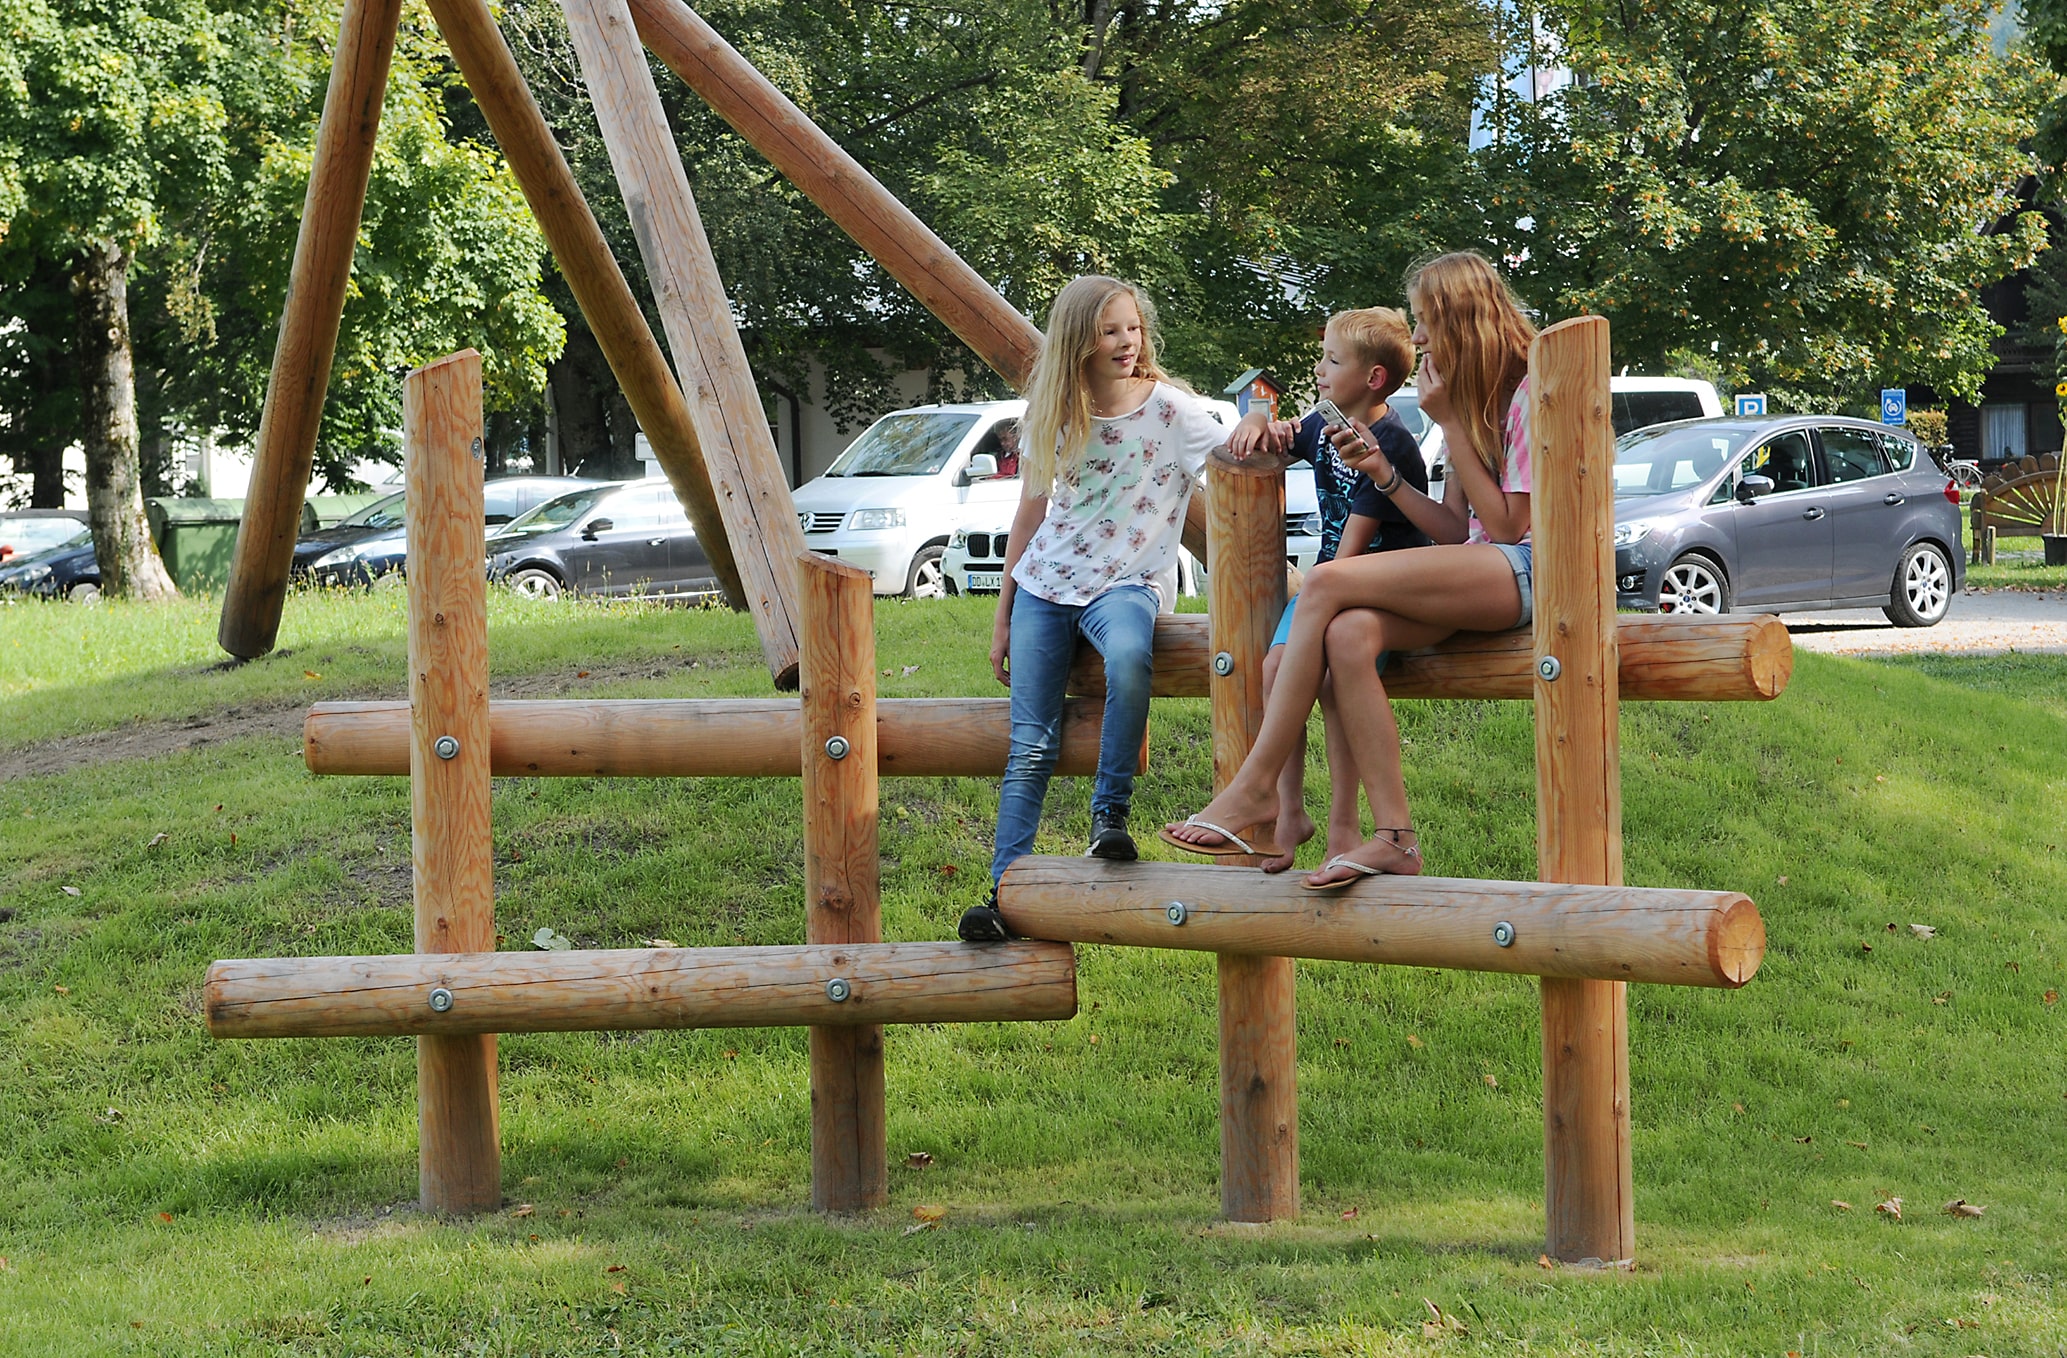 Sitting Fence a natural play equipment made for socialising and climbing